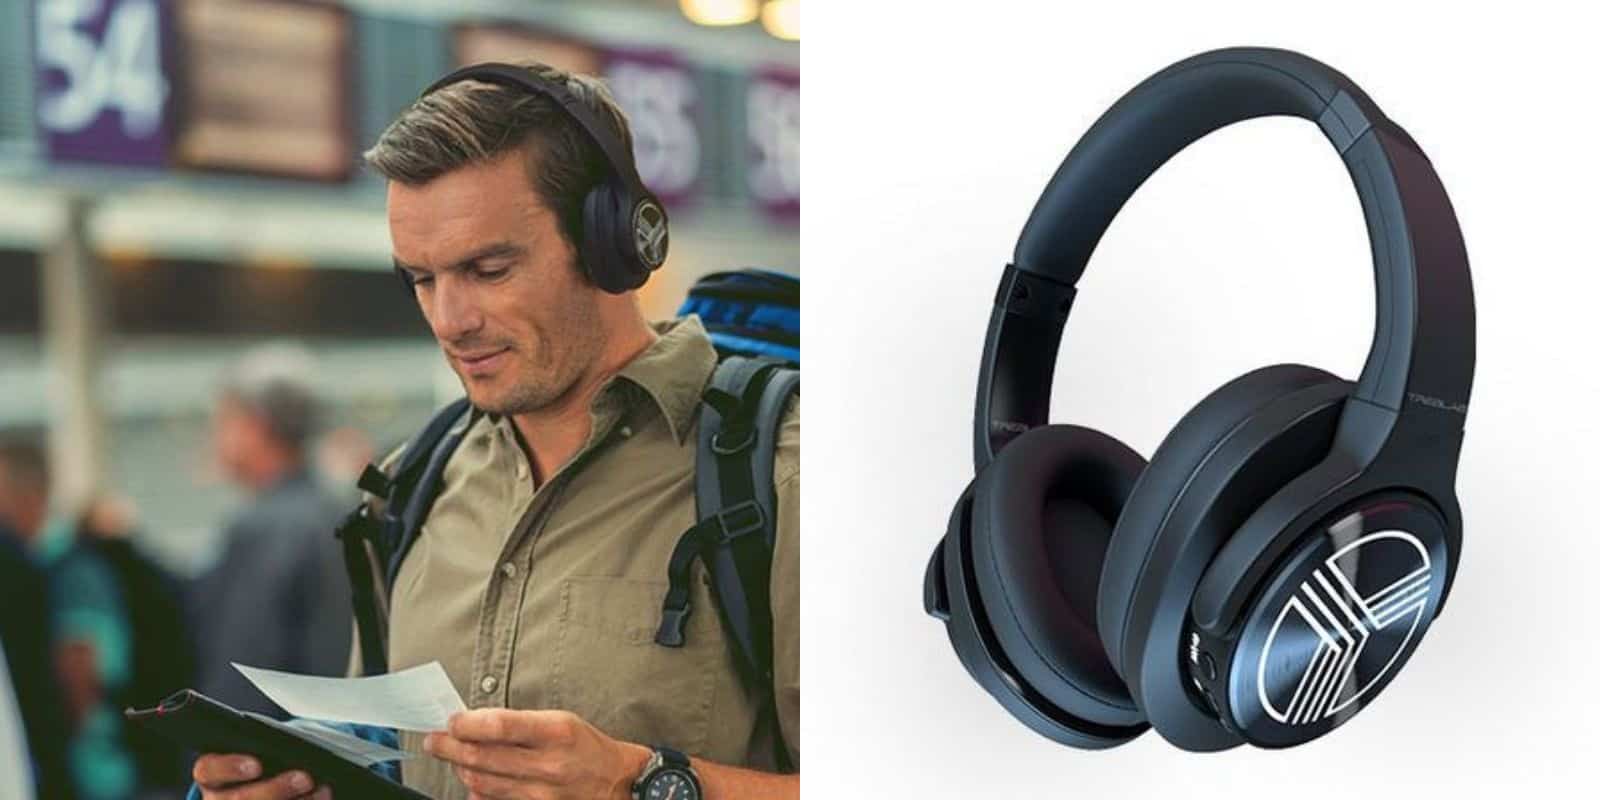 Don't drop hundreds of bucks on a set of headphones when you can spend way less for the same features.